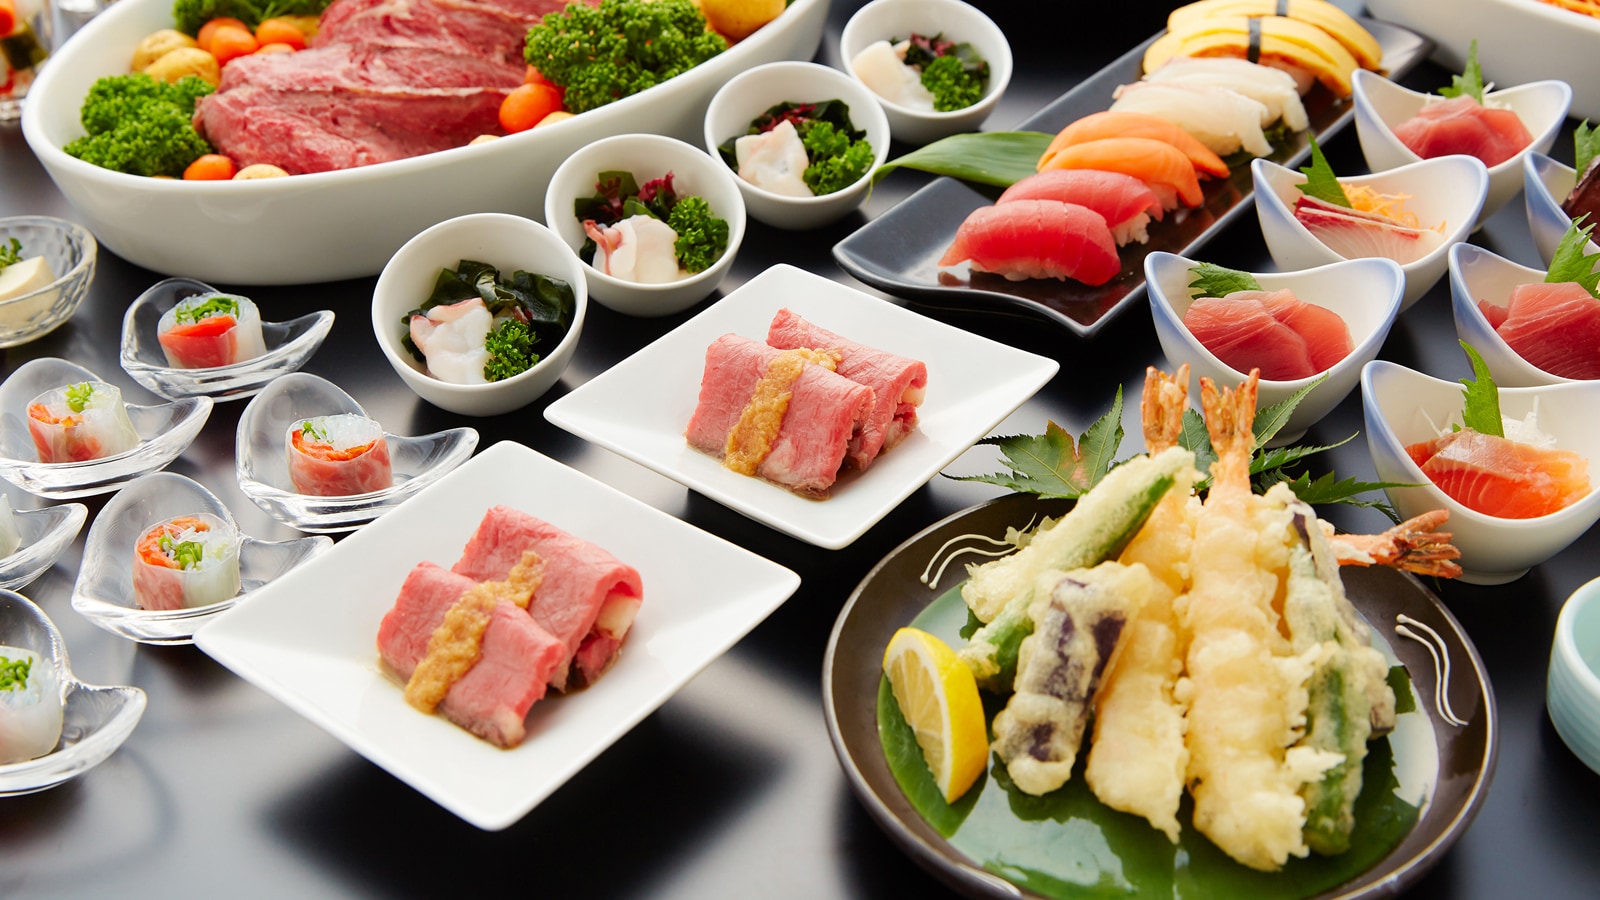 About 50 kinds of premium buffet. All-you-can-eat sushi, tempura, dessert, etc. All-you-can-drink soft drinks ♪